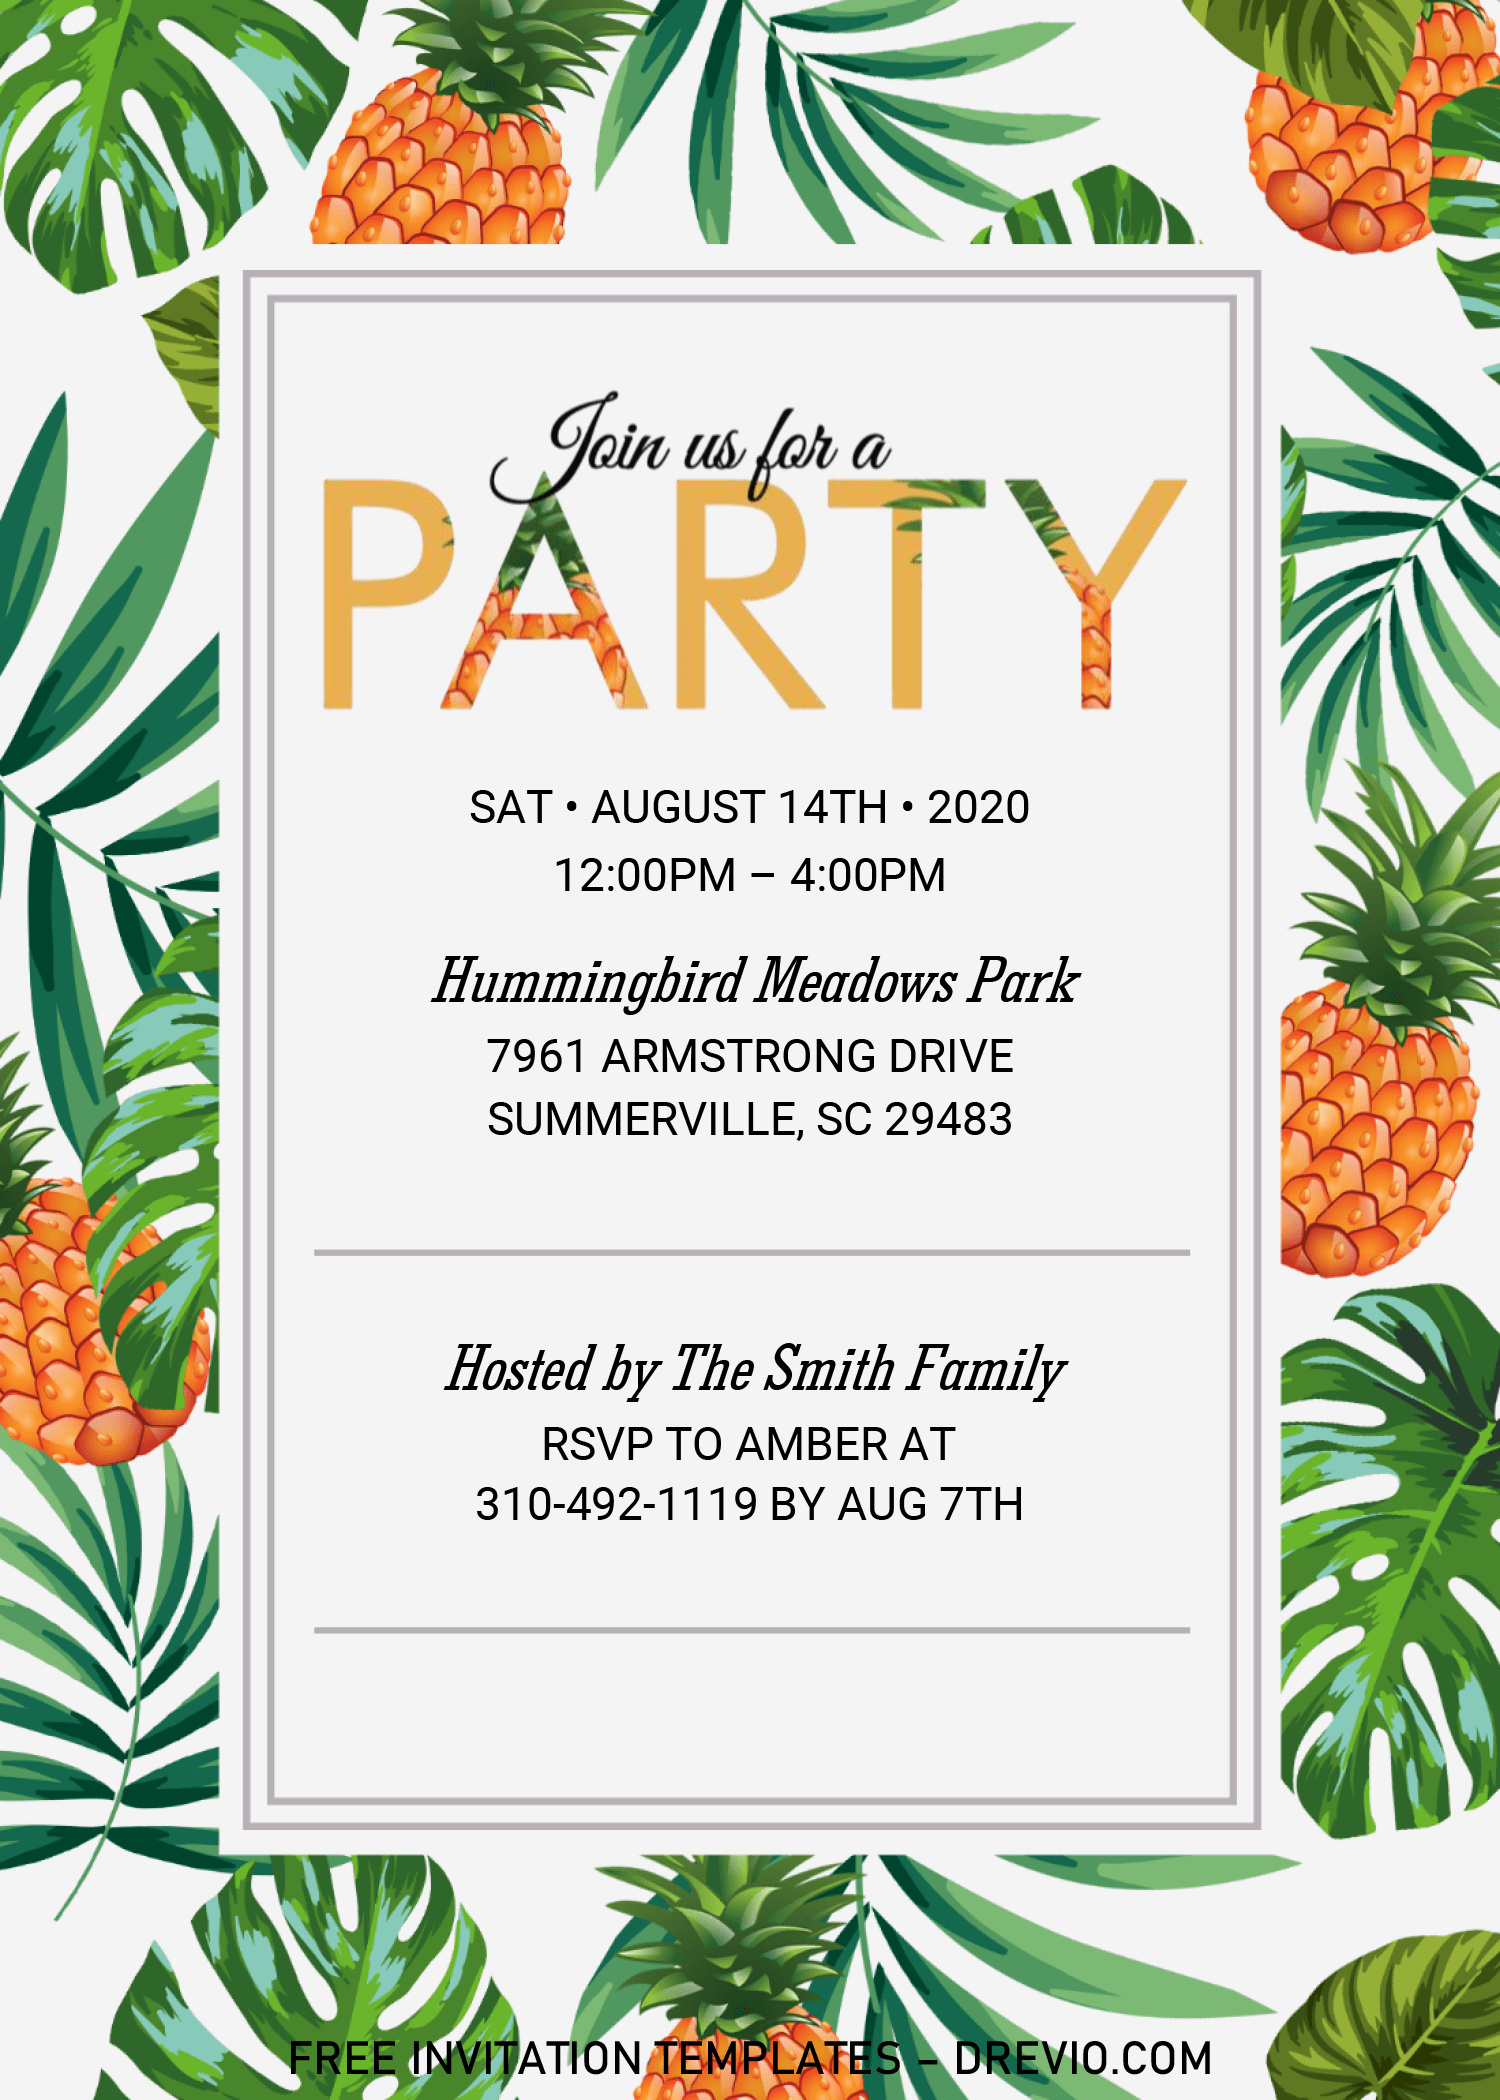 Summer Party Invitation Templates Editable With MS Word Download